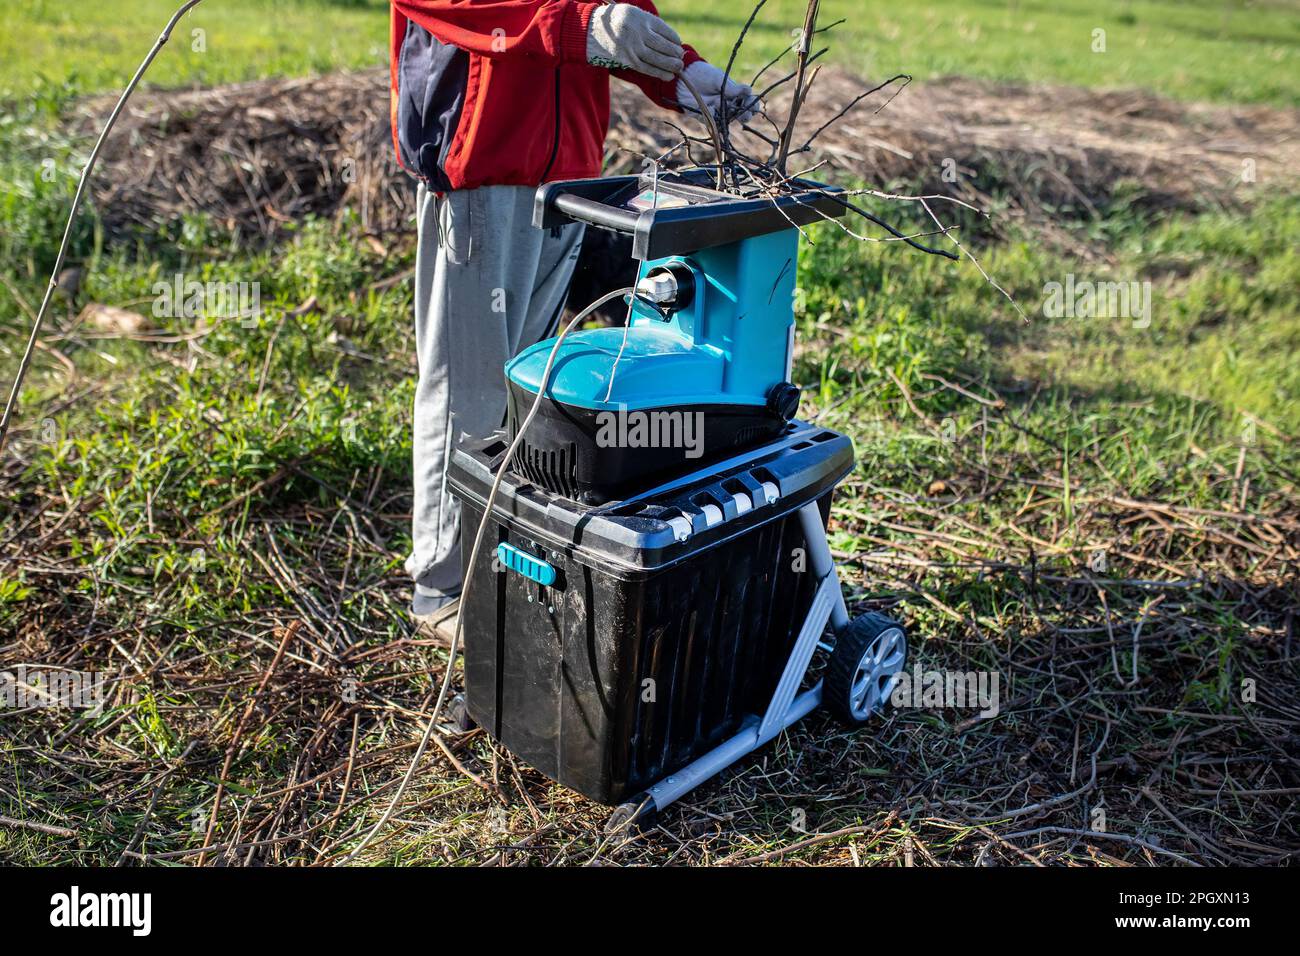 Spring cleaning in the garden. Gardener putting dry branches in a garden grinder or wood chopper for chopping trees Stock Photo